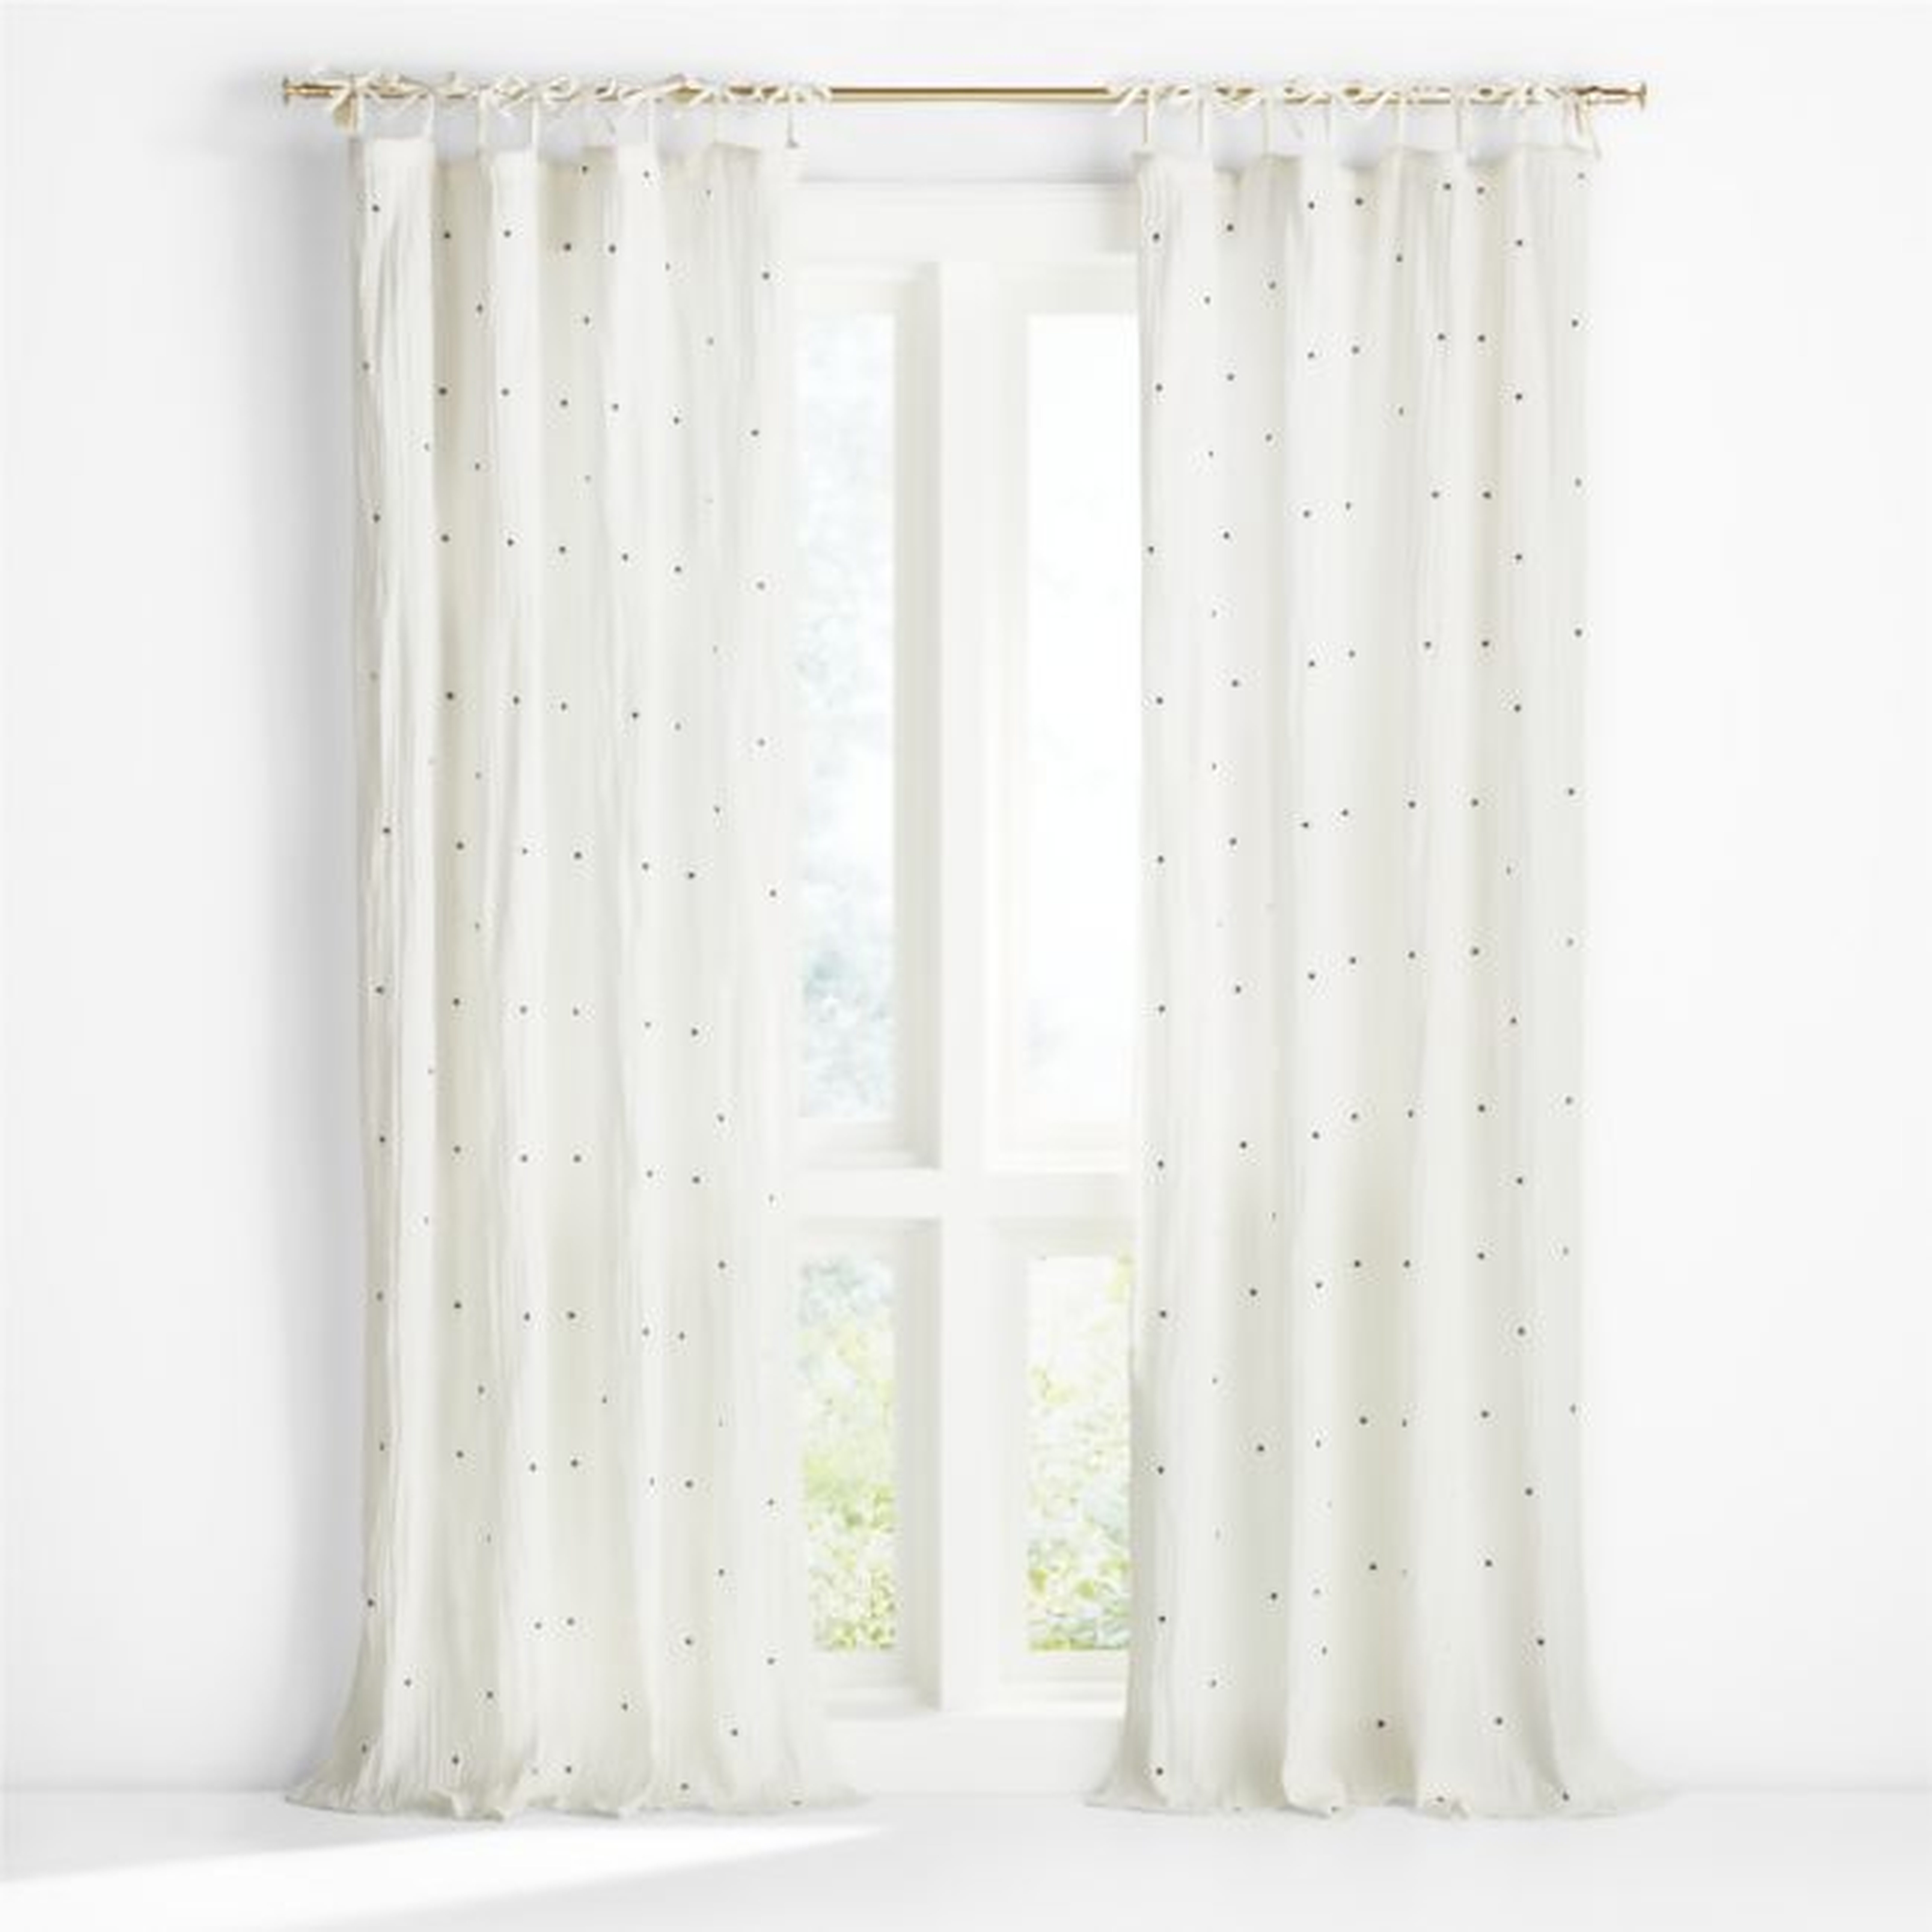 Aldrin Black and White Organic Cotton Sheer Window Curtain Panel 44"x63" - Crate and Barrel